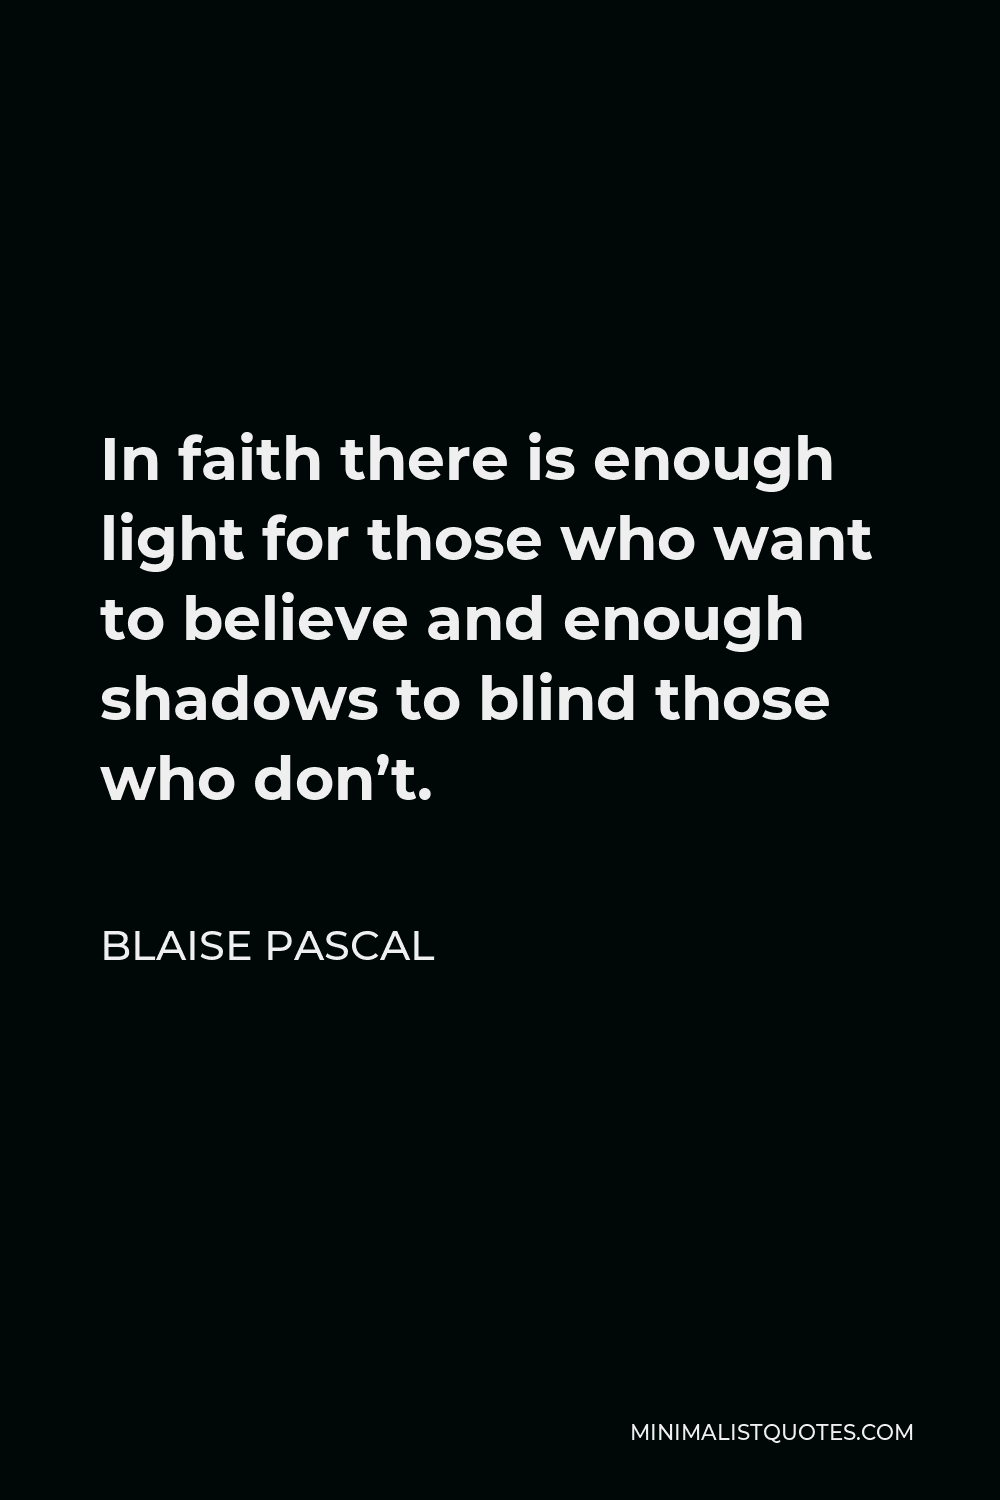 Blaise Pascal Quote - In faith there is enough light for those who want to believe and enough shadows to blind those who don’t.